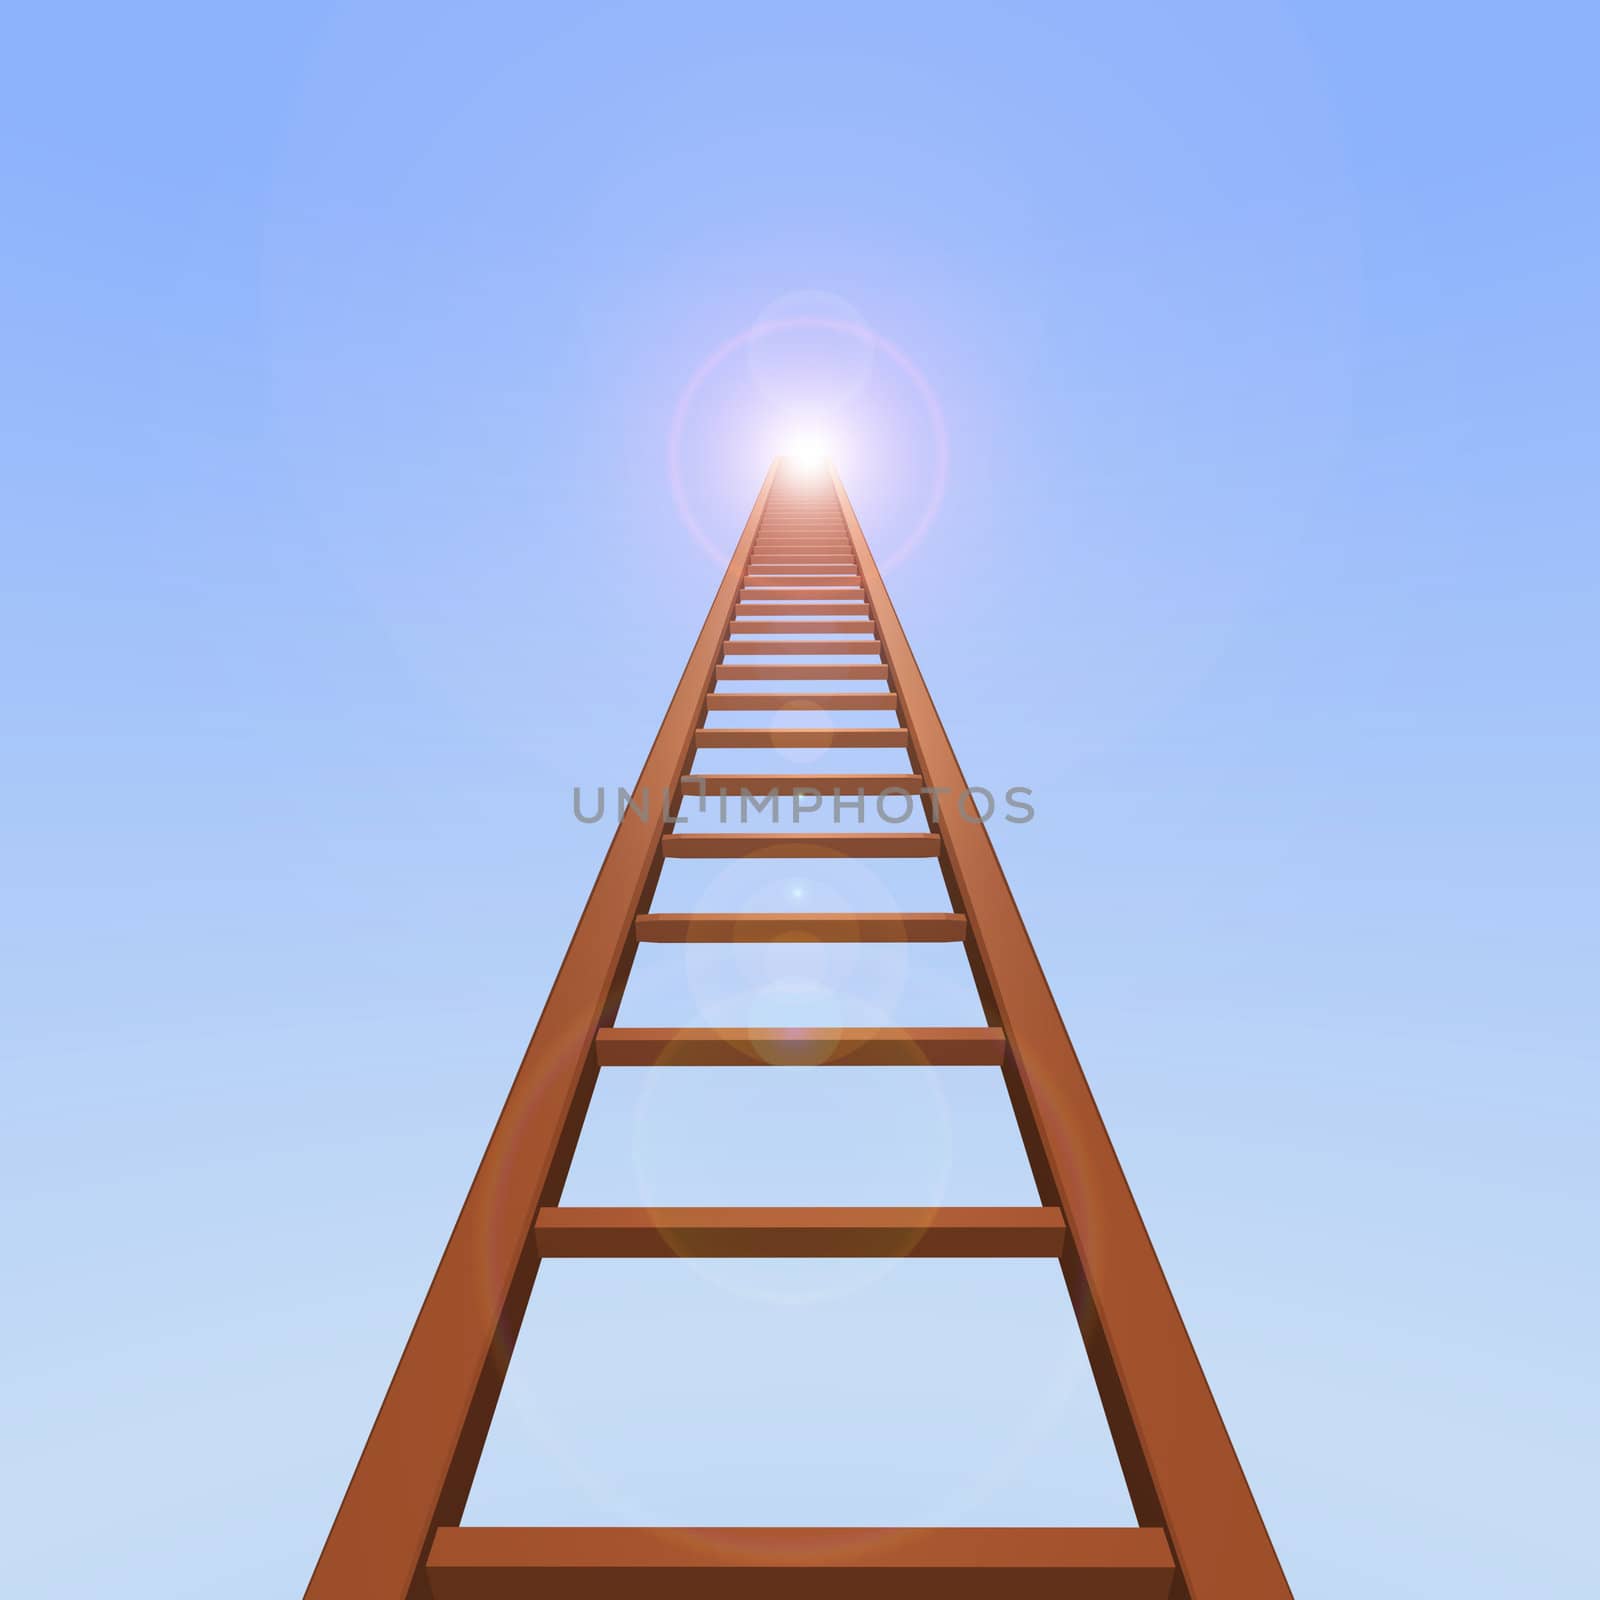 Sky Ladder by nmarques74